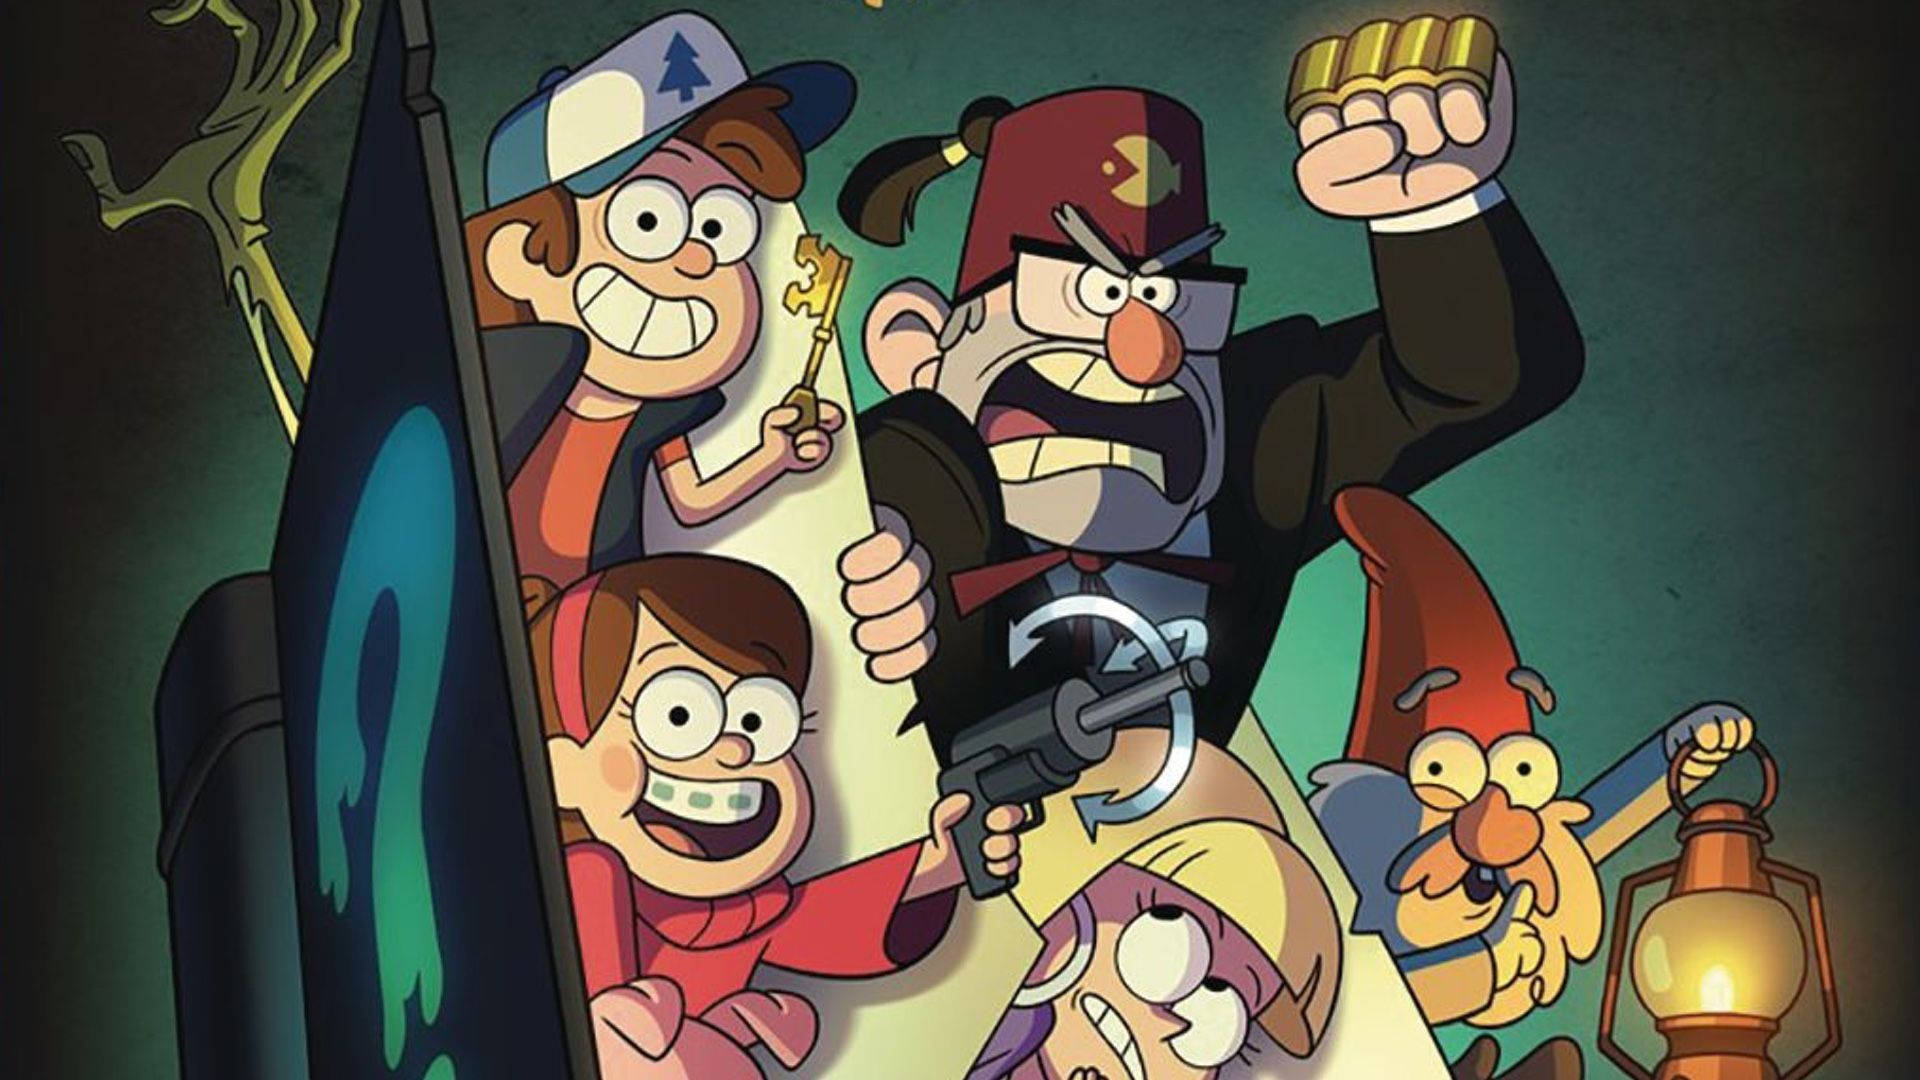 Grunkle Stan And Kids In Book Background